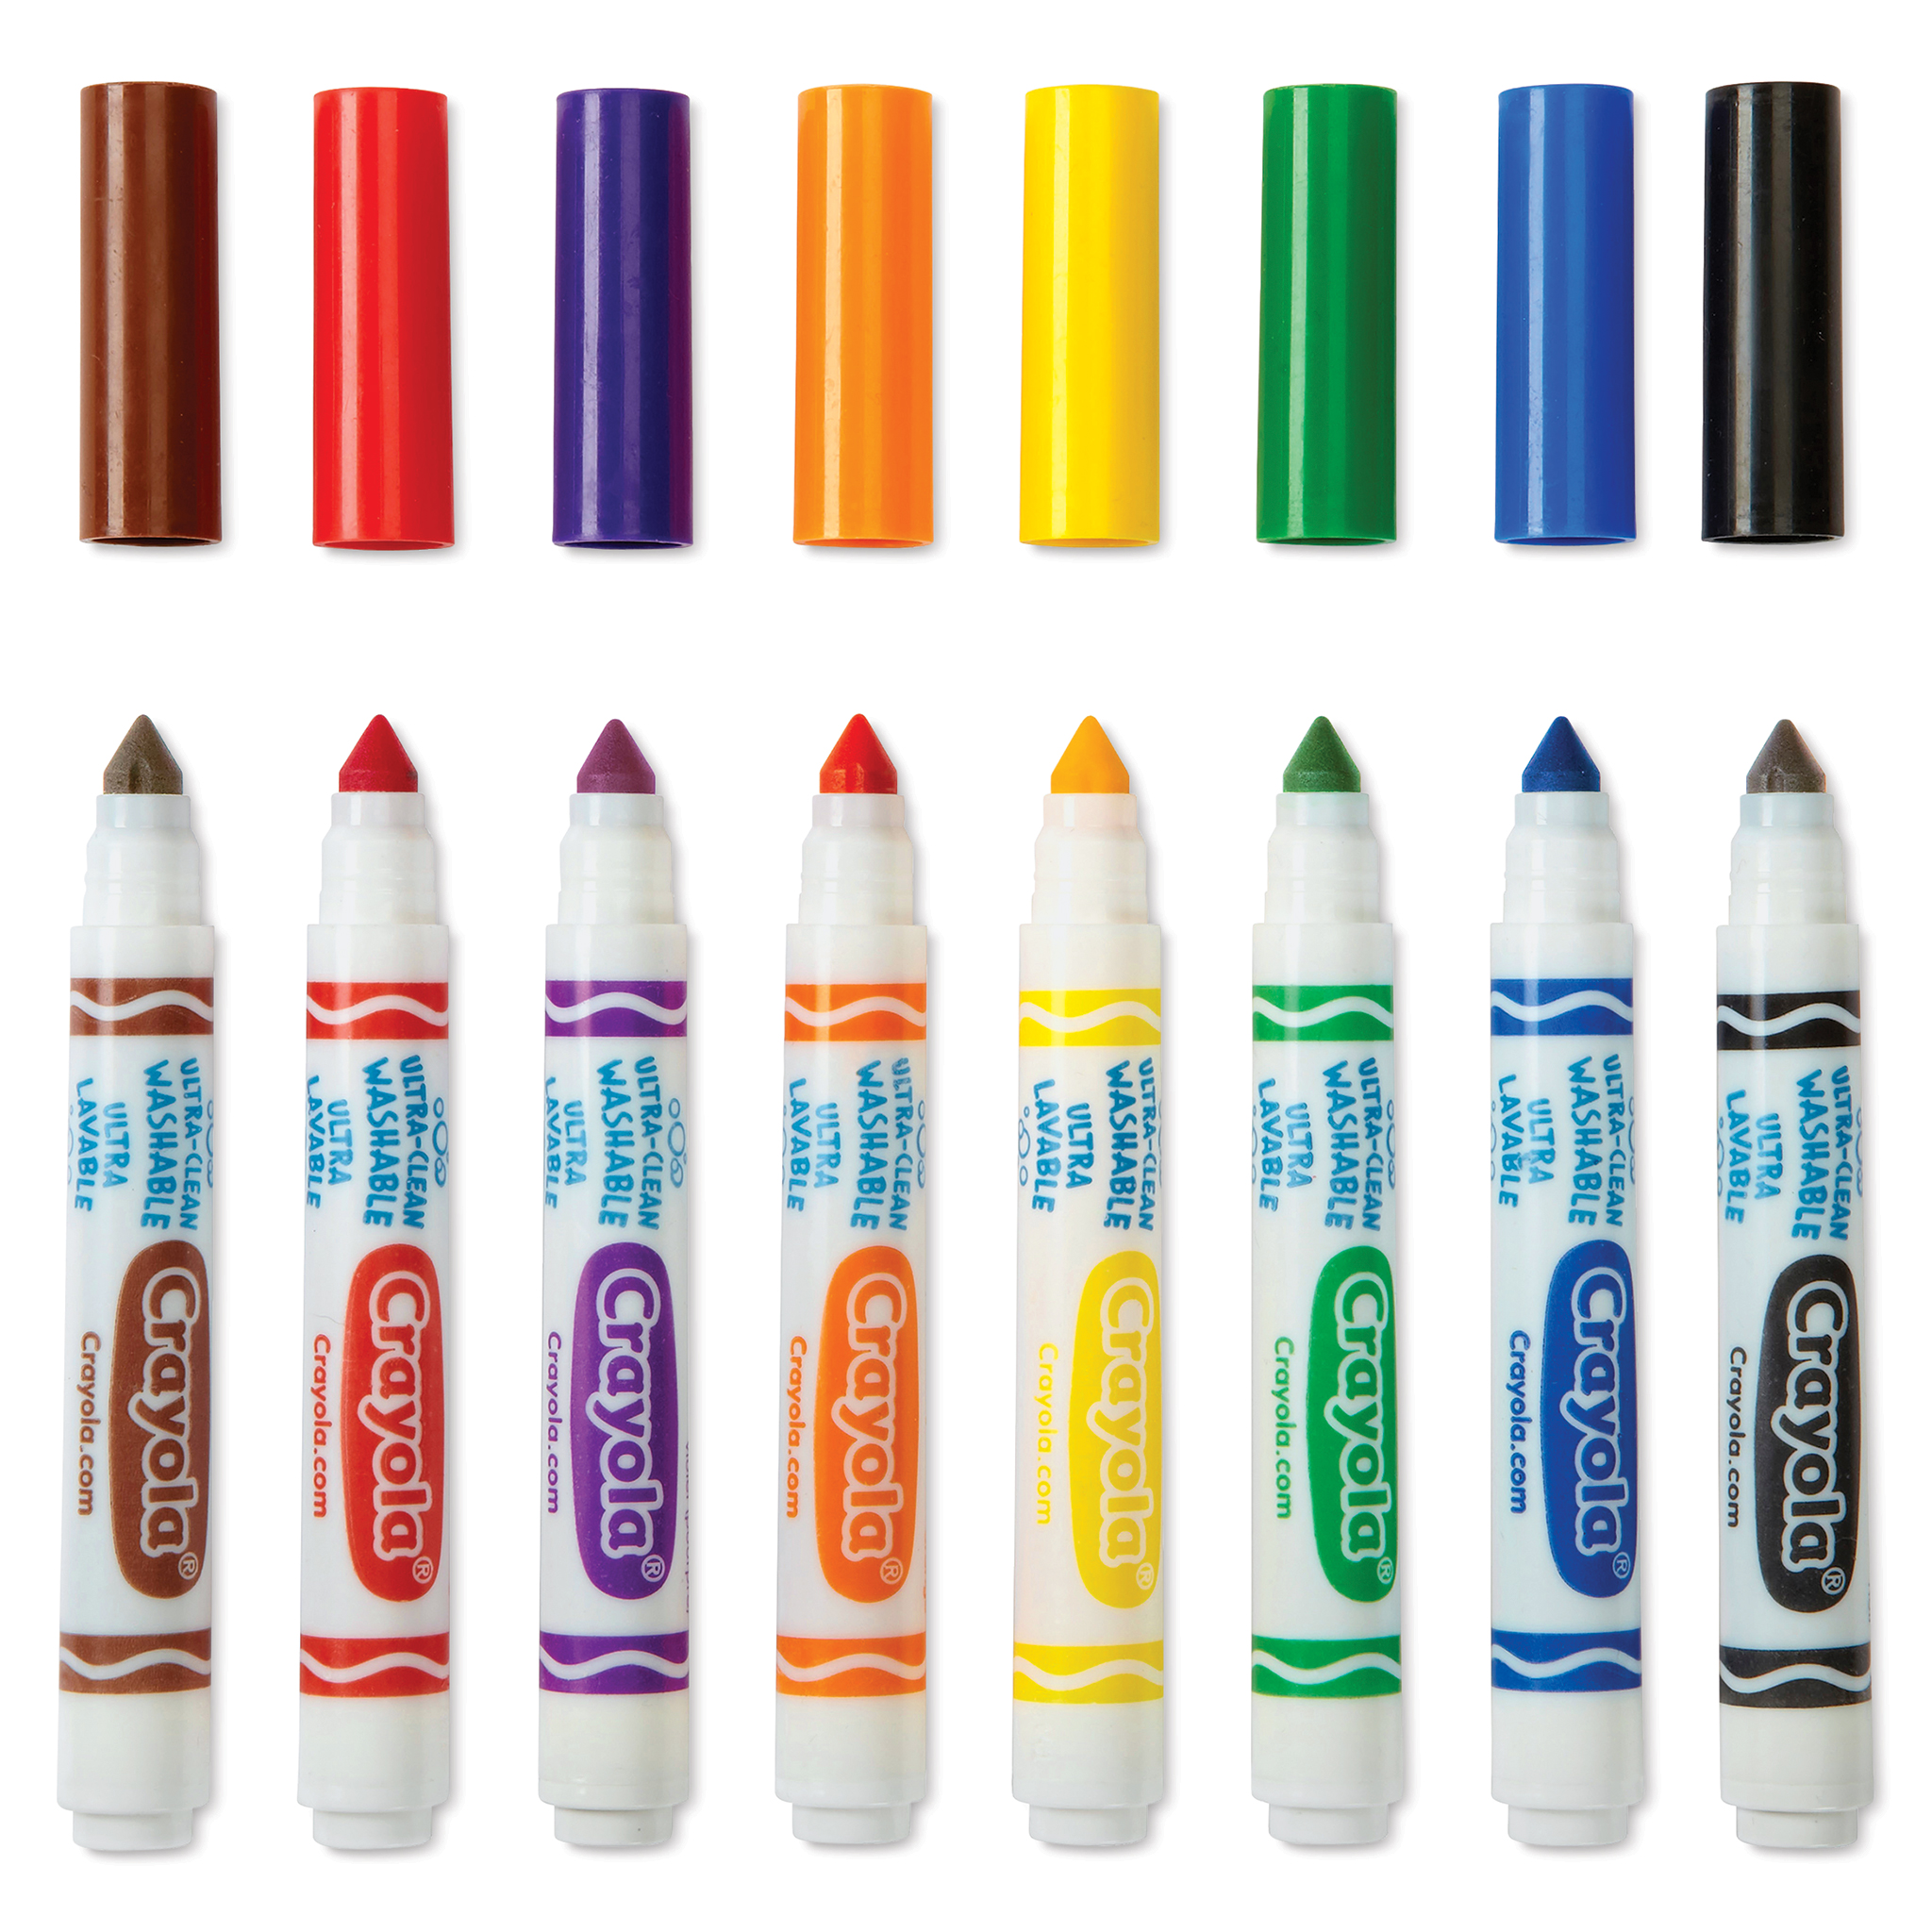 Crayola Ultra-Clean Washable Markers and Sets